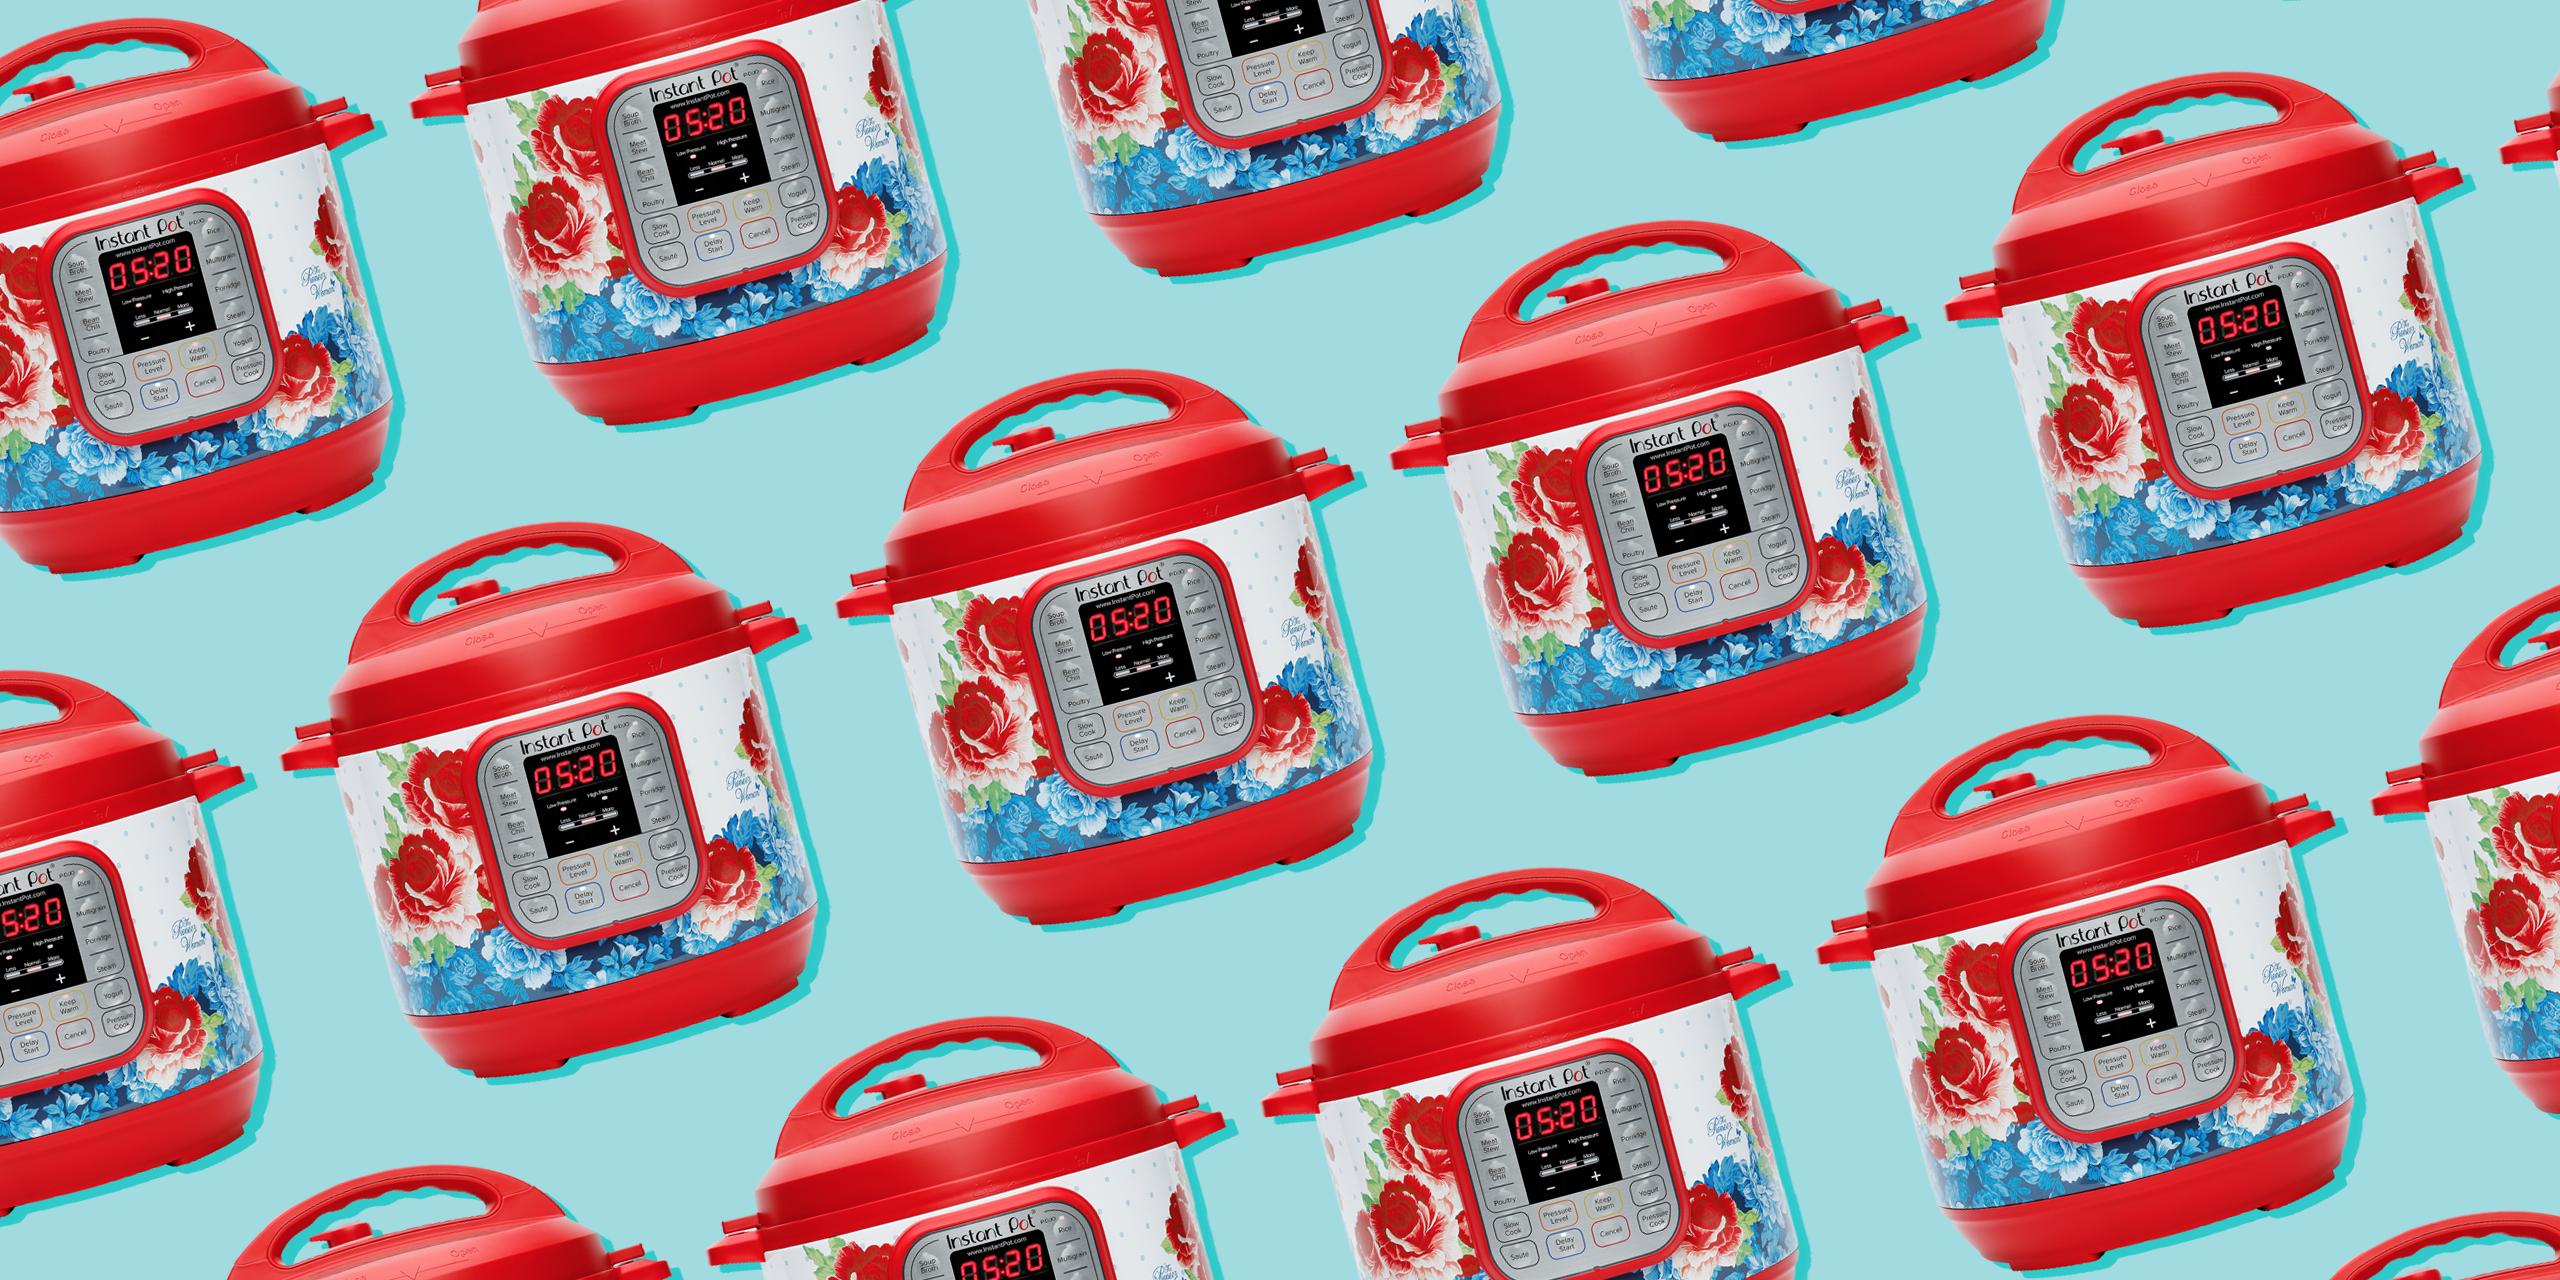 https://hips.hearstapps.com/hmg-prod/images/pioneer-woman-frontier-rose-instant-pot-1570805182.png